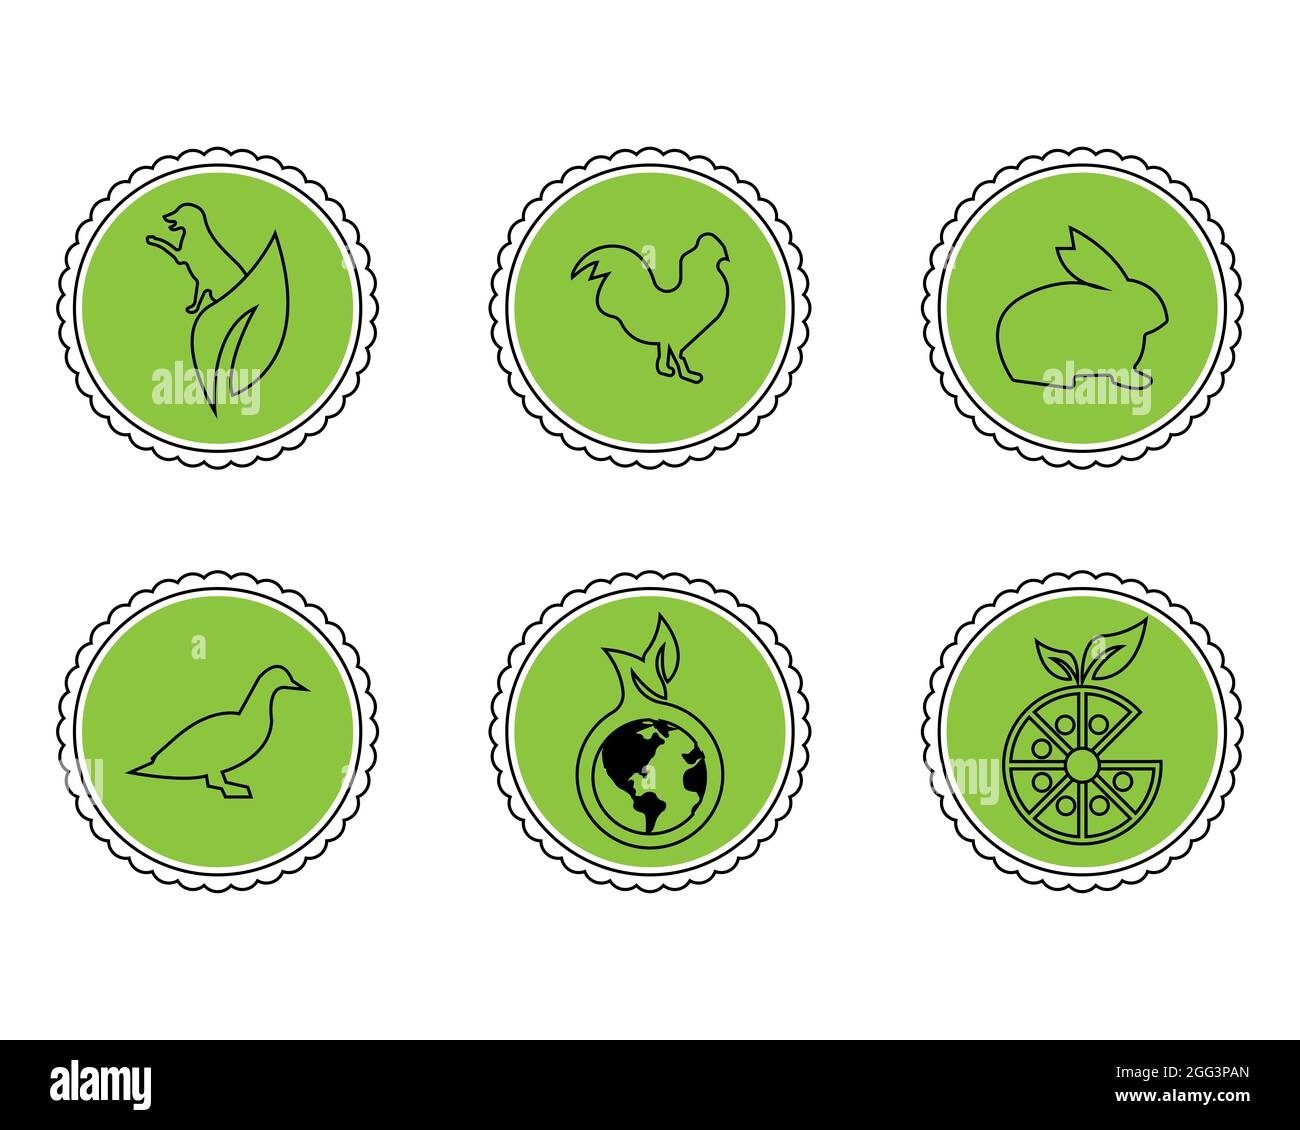 animal line icon set in green circle for food products Stock Photo